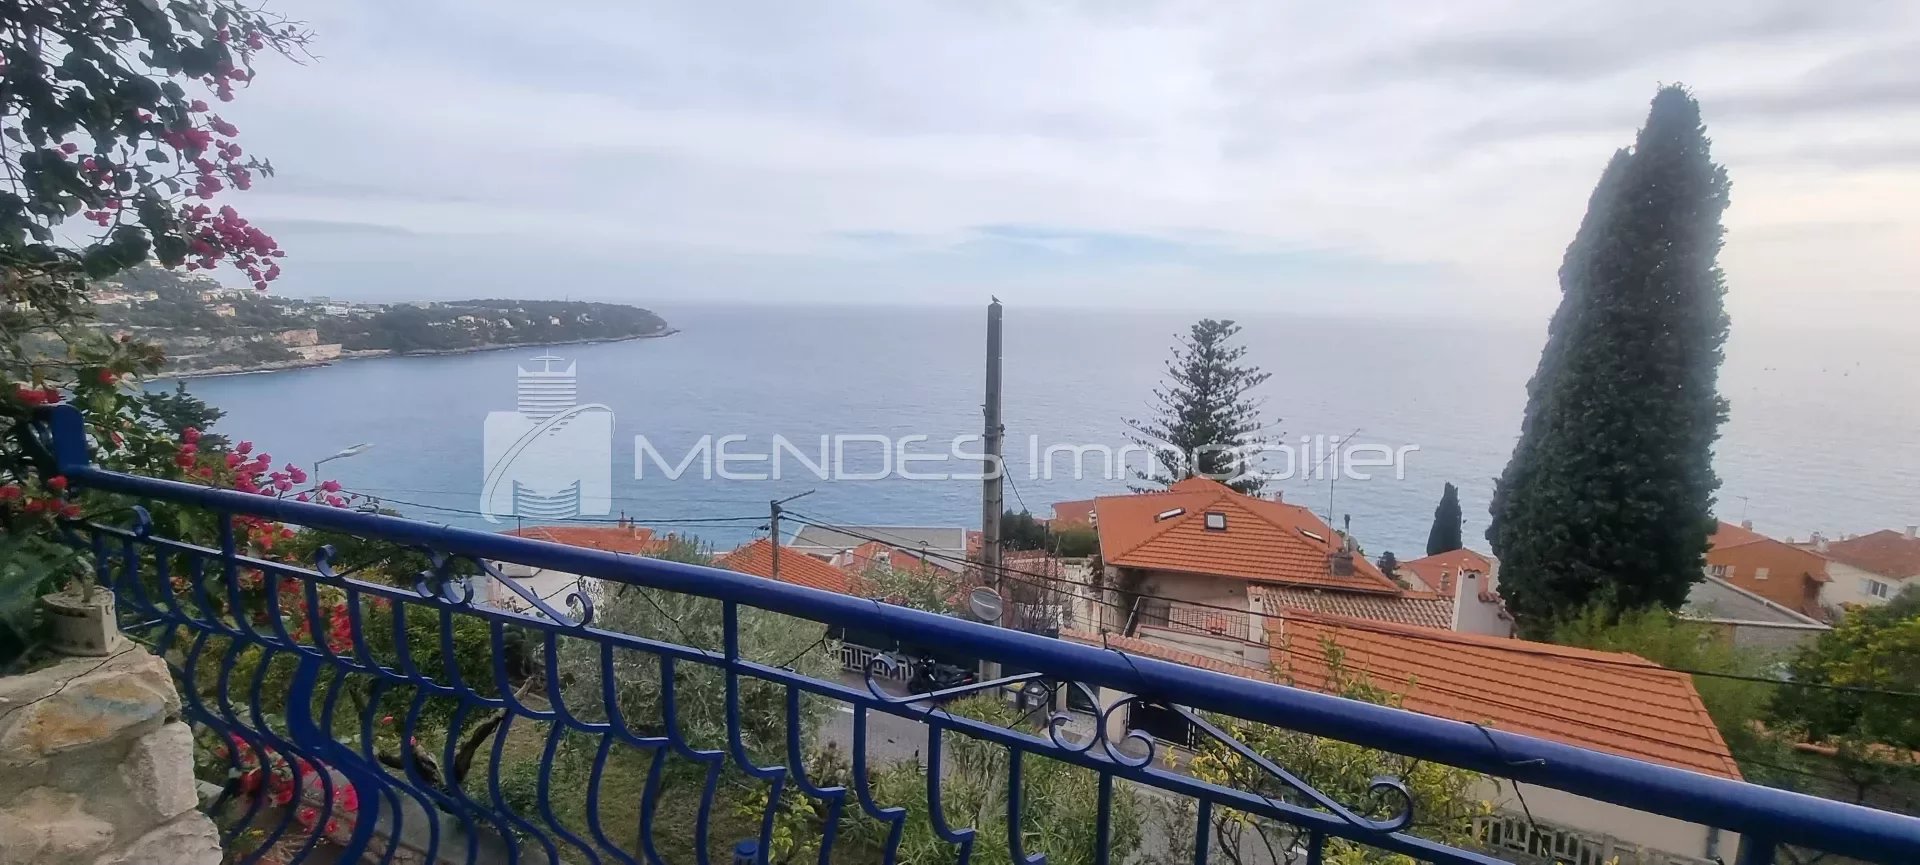 2 BR WITH POLL IN ROQUEBRUNE CAP MARTIN